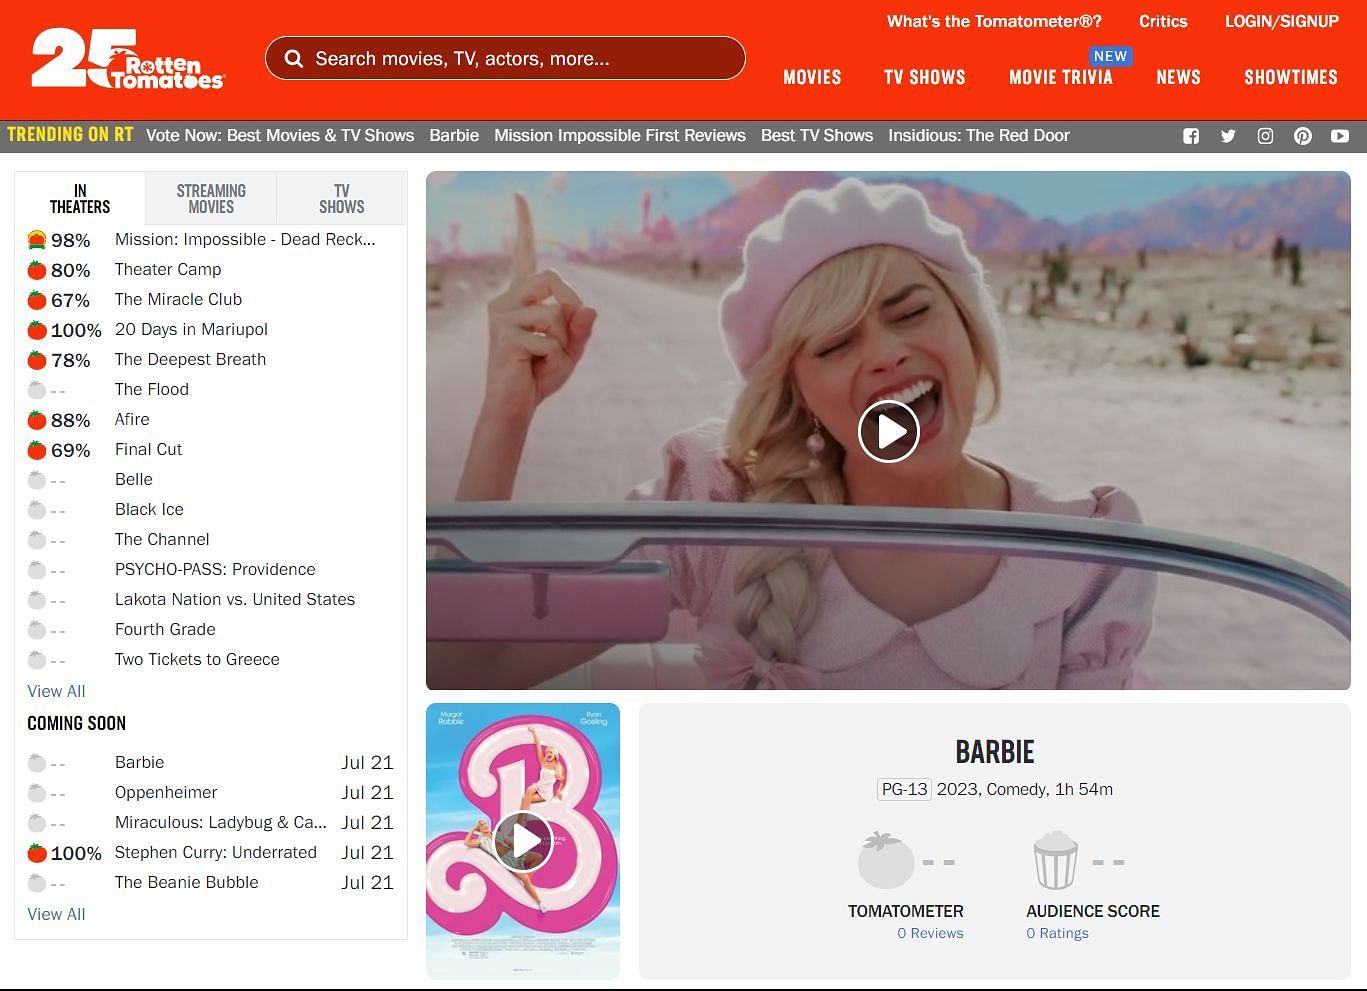 Barbie has secures high Rotten Tomatoes score – and it's not even out yet